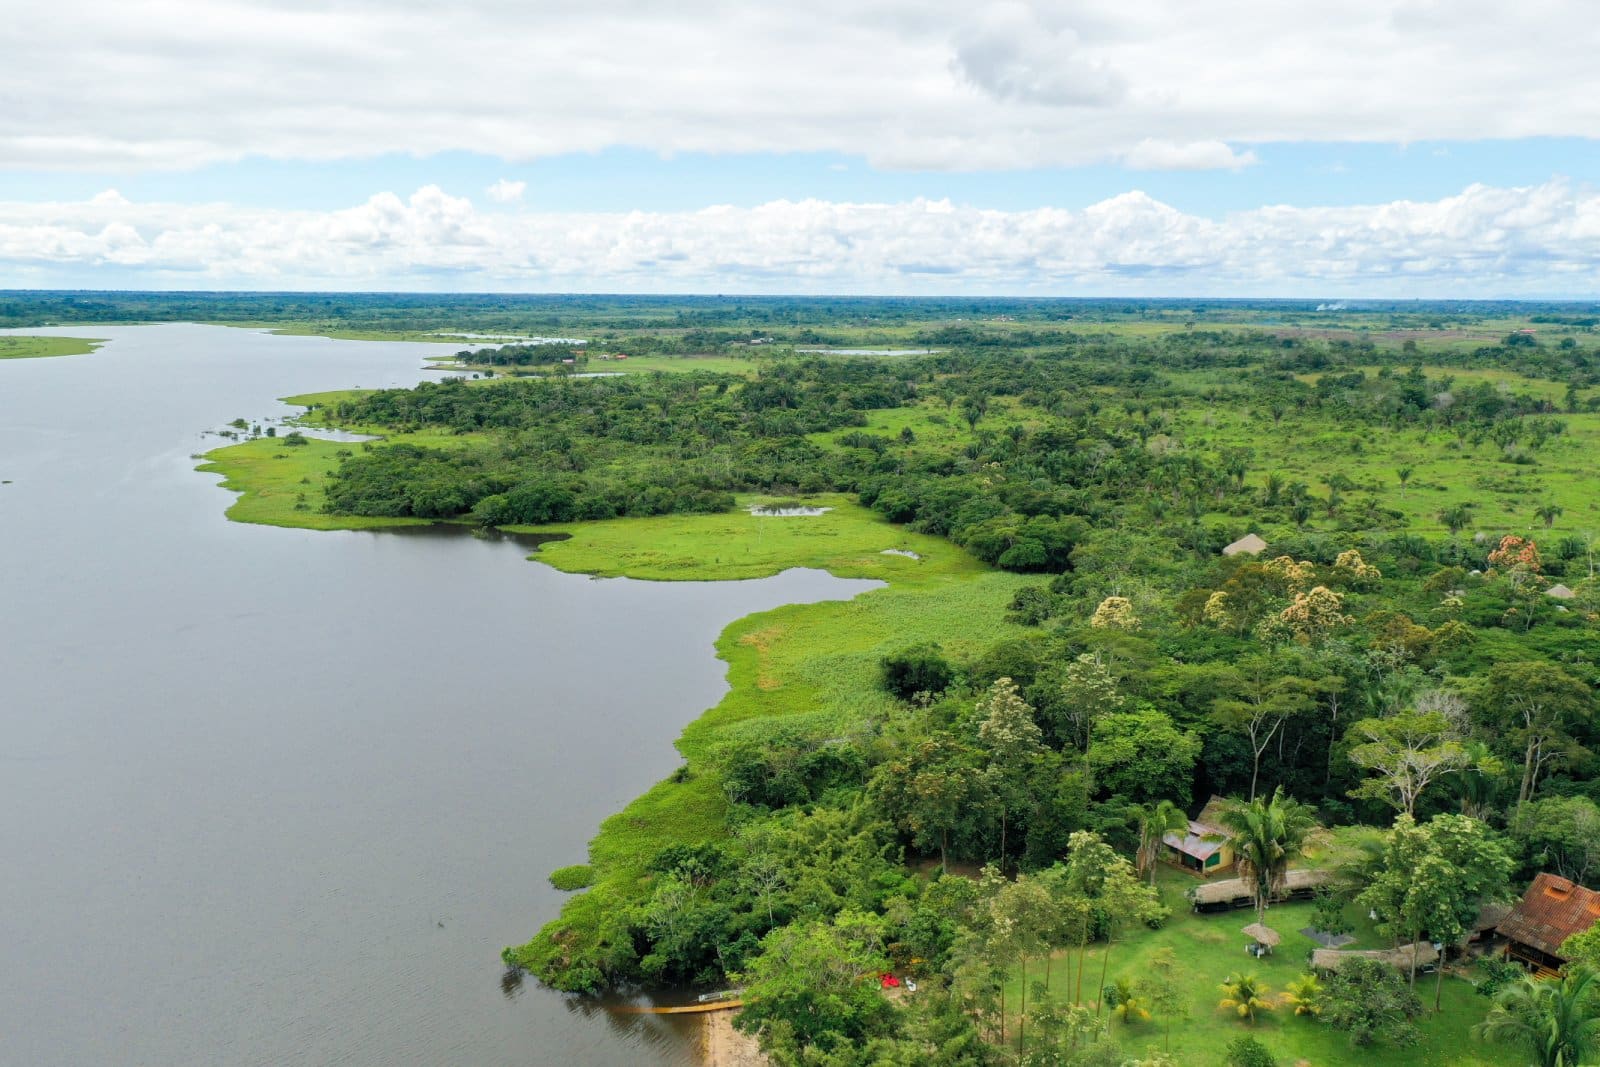 <p class="wp-caption-text">Image Credit: Shutterstock / diegoguiop</p>  <p><span>Pucallpa, situated on the banks of the Ucayali River, is a vibrant city that acts as a conduit to the Shipibo-Conibo communities, known for its intricate art and profound shamanic practices. The city is a blend of urban and indigenous cultures, with easy access to remote villages where traditional ceremonies, including ayahuasca and San Pedro cactus rituals, are practiced. </span></p>